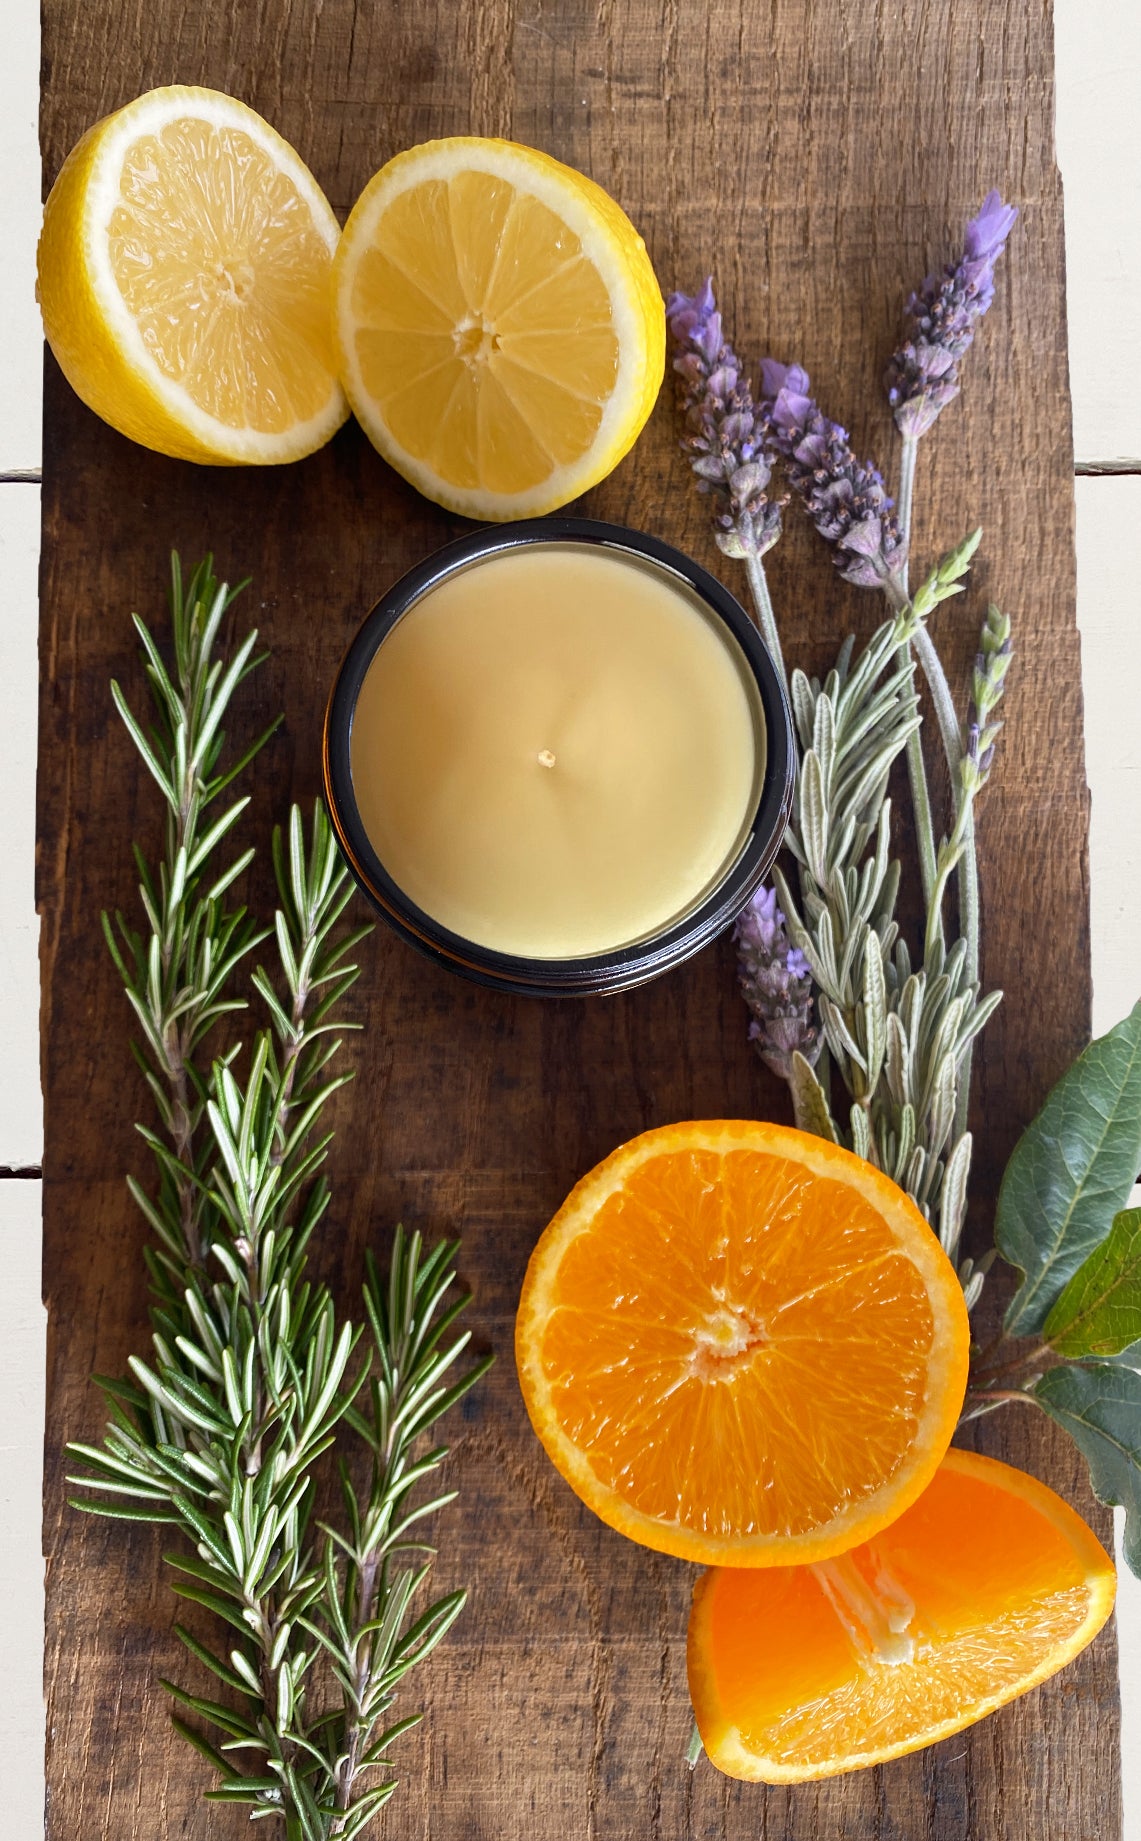 Bouclé soy candle on board surrounded by the natural ingredients. Made using lavender, rosemary, orange and lemon essential oils in East London and Brighton in the UK